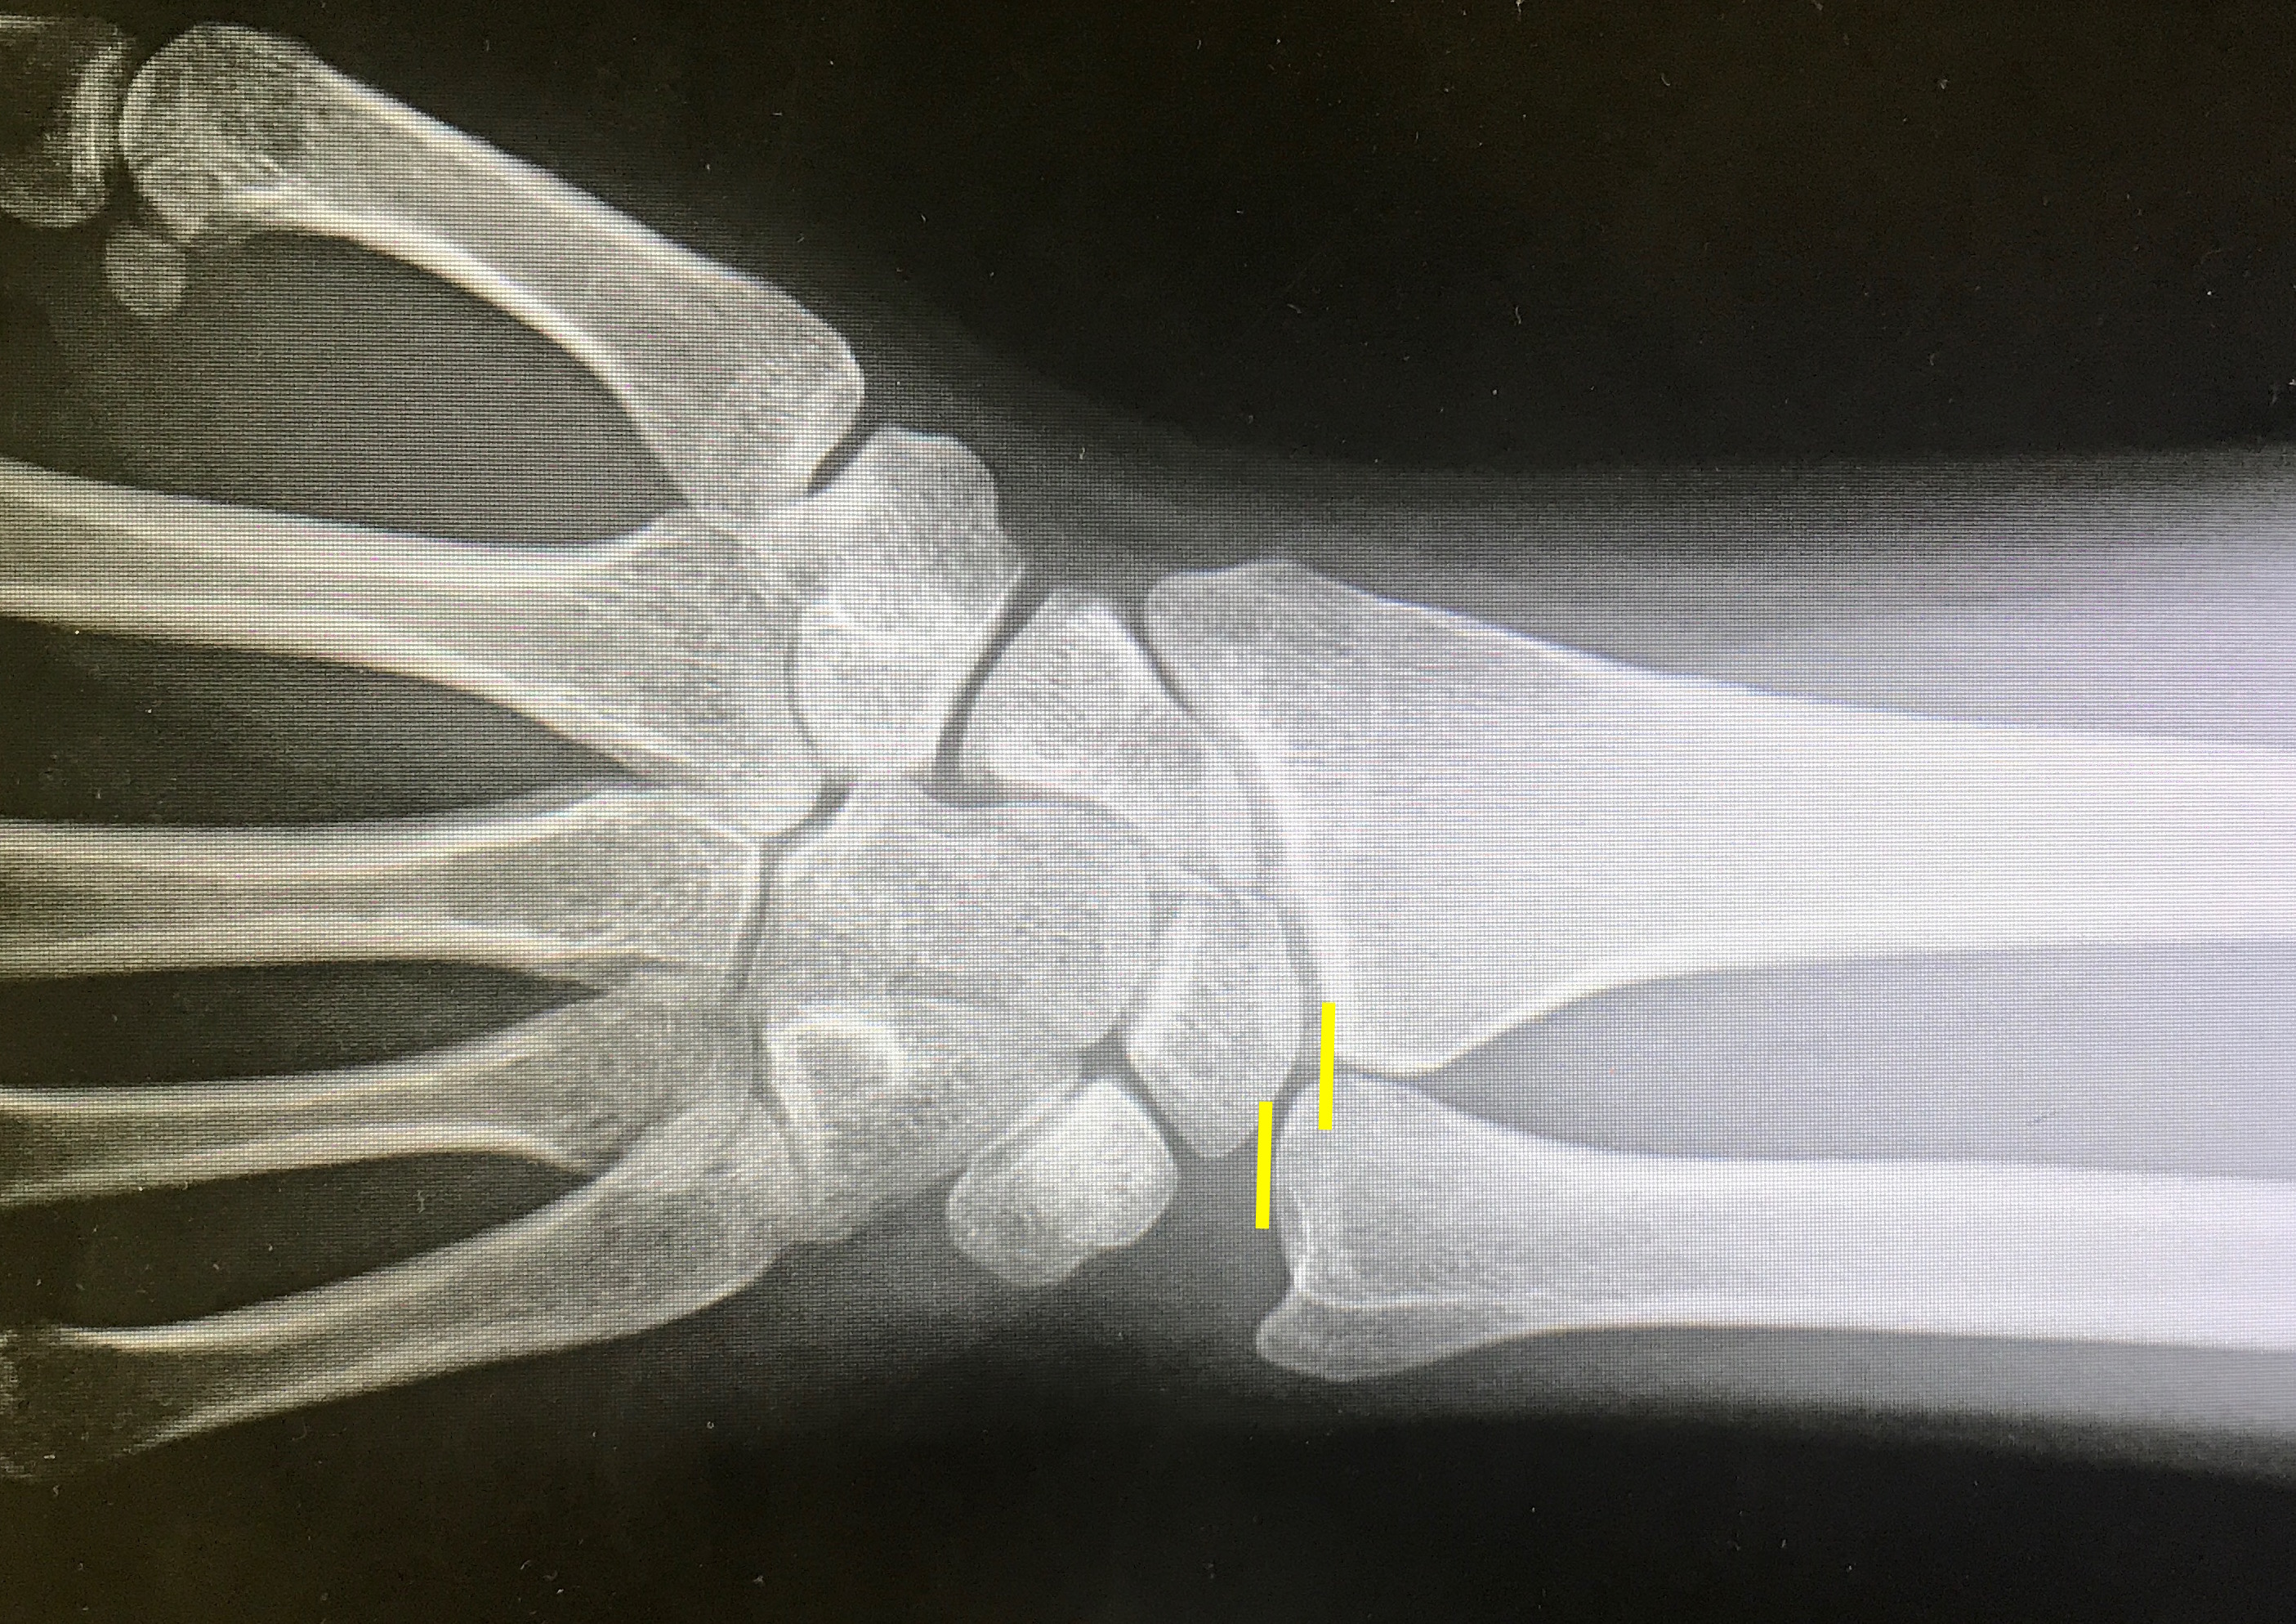 Positive ulnar variance is often associated with L-T tears.